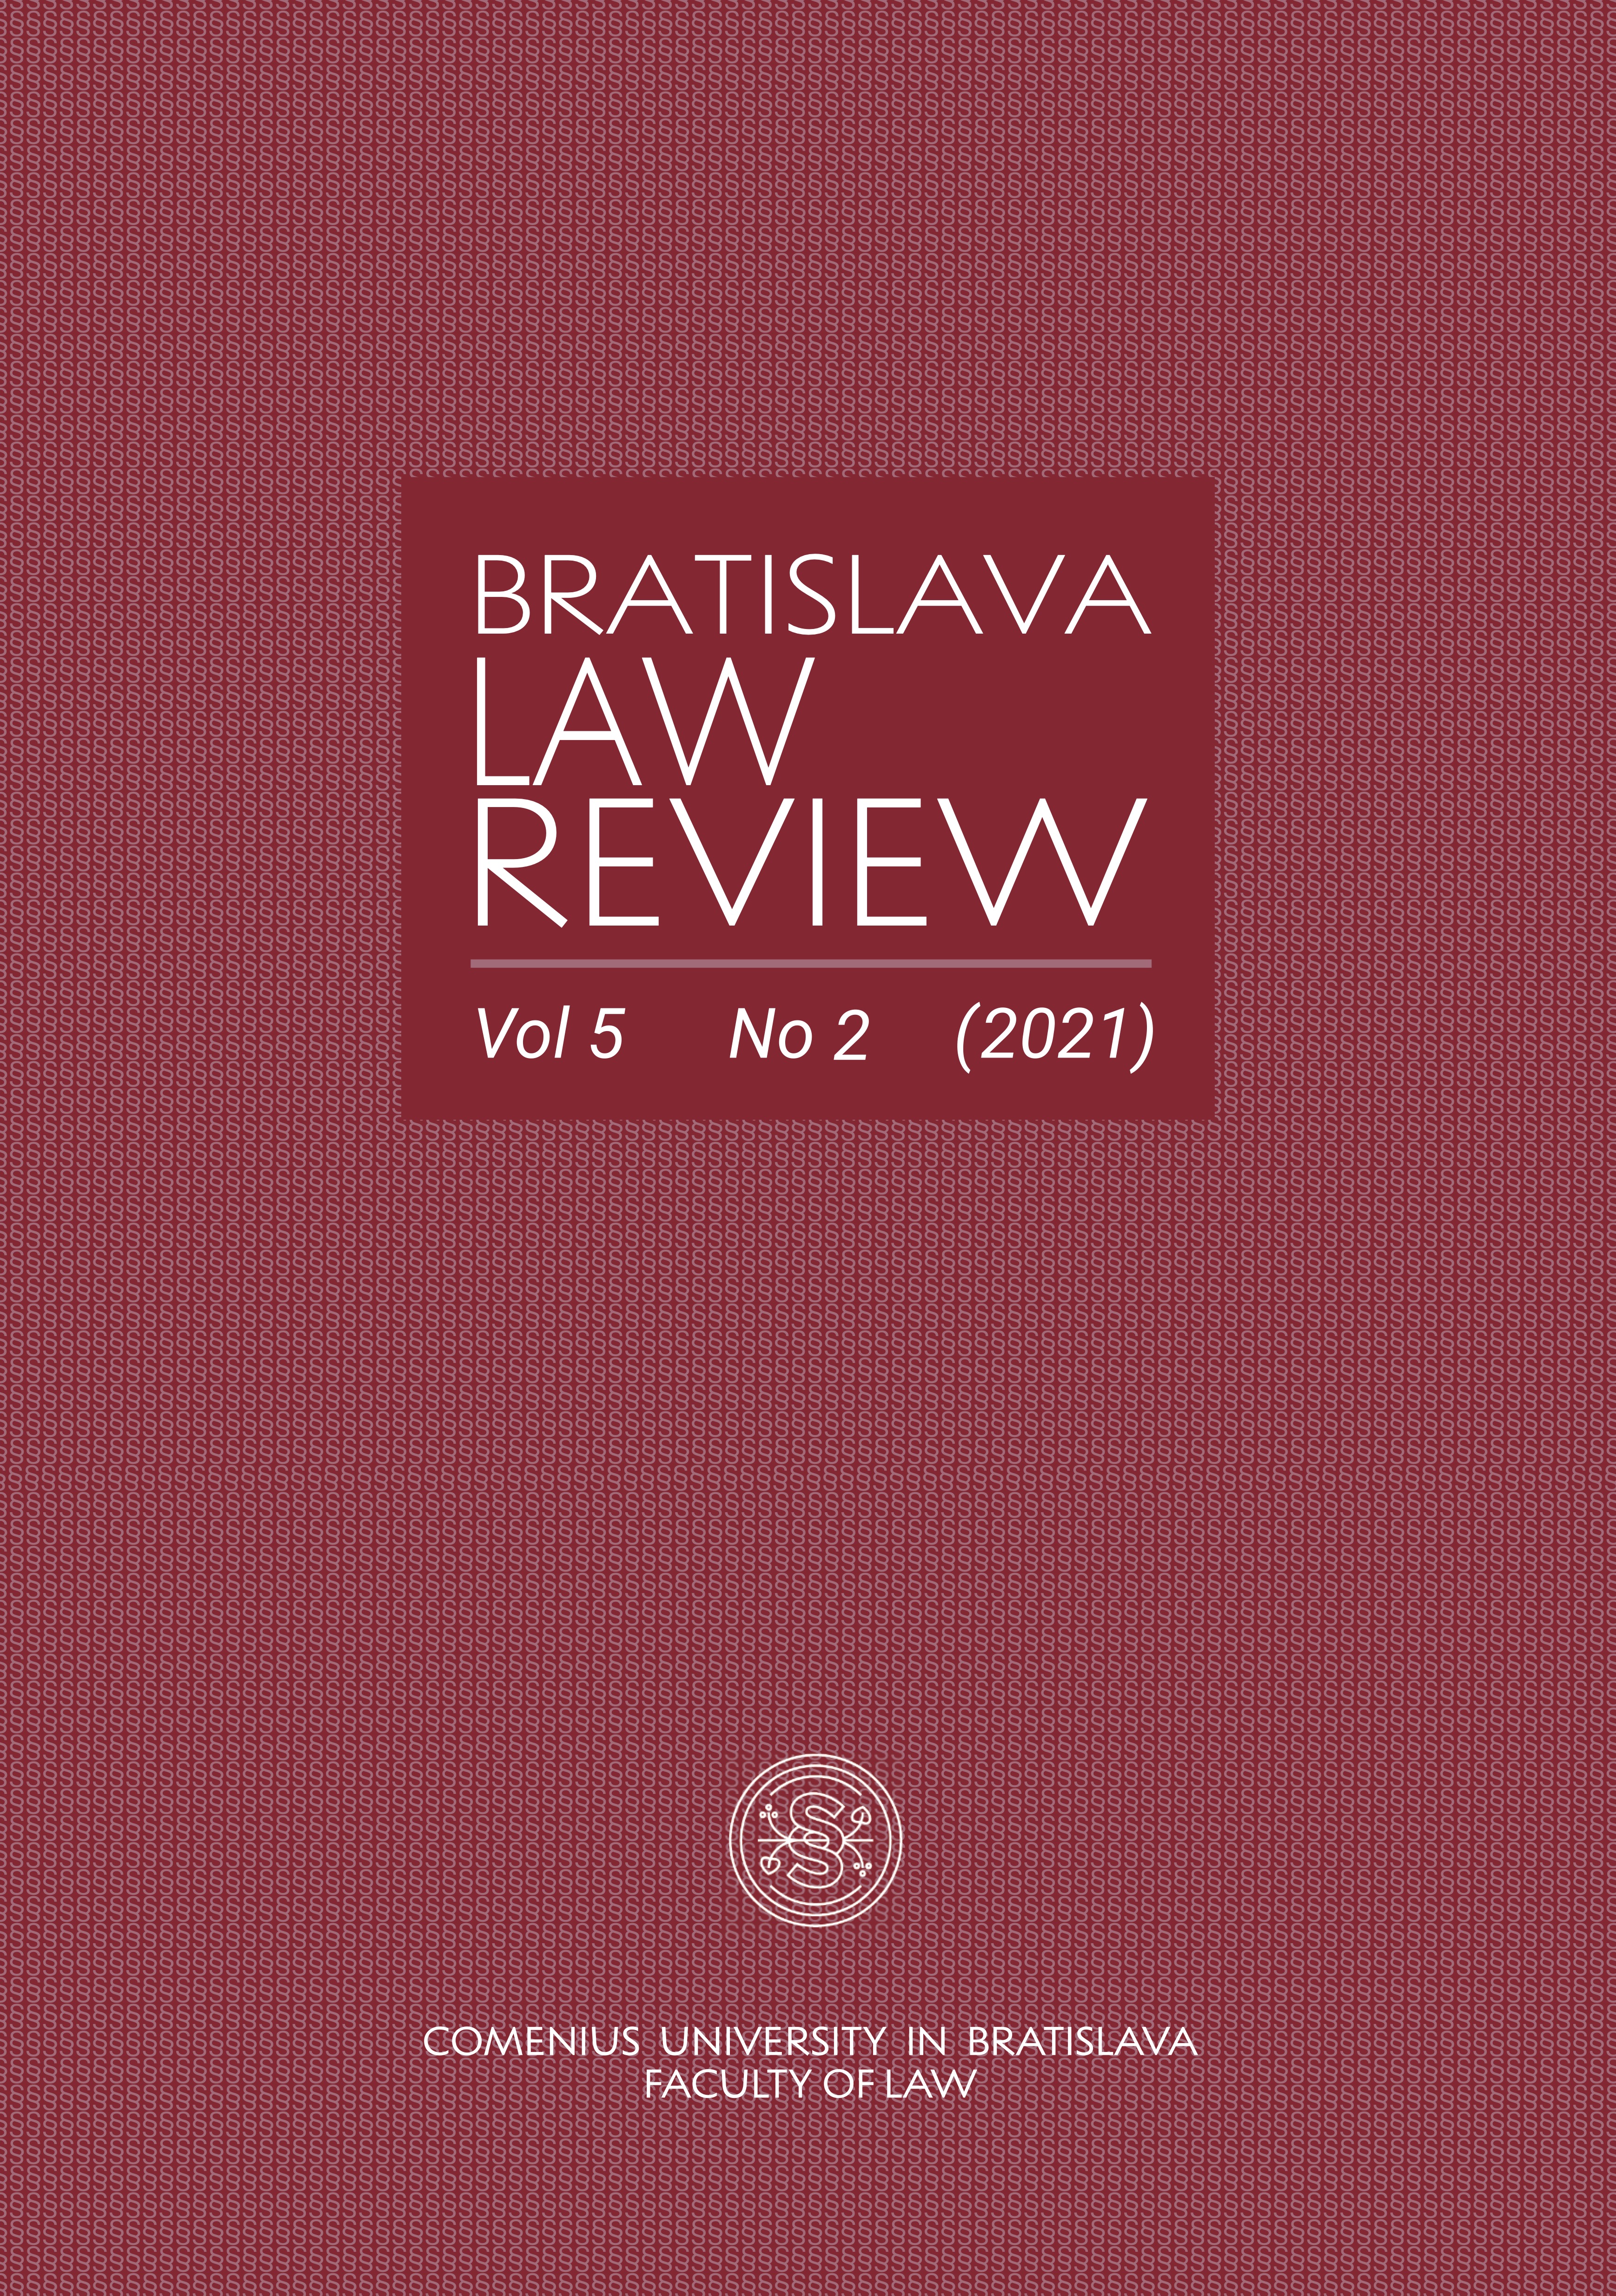 Final Theses of Students of Faculty of Law in Lithuania: 1925-1939